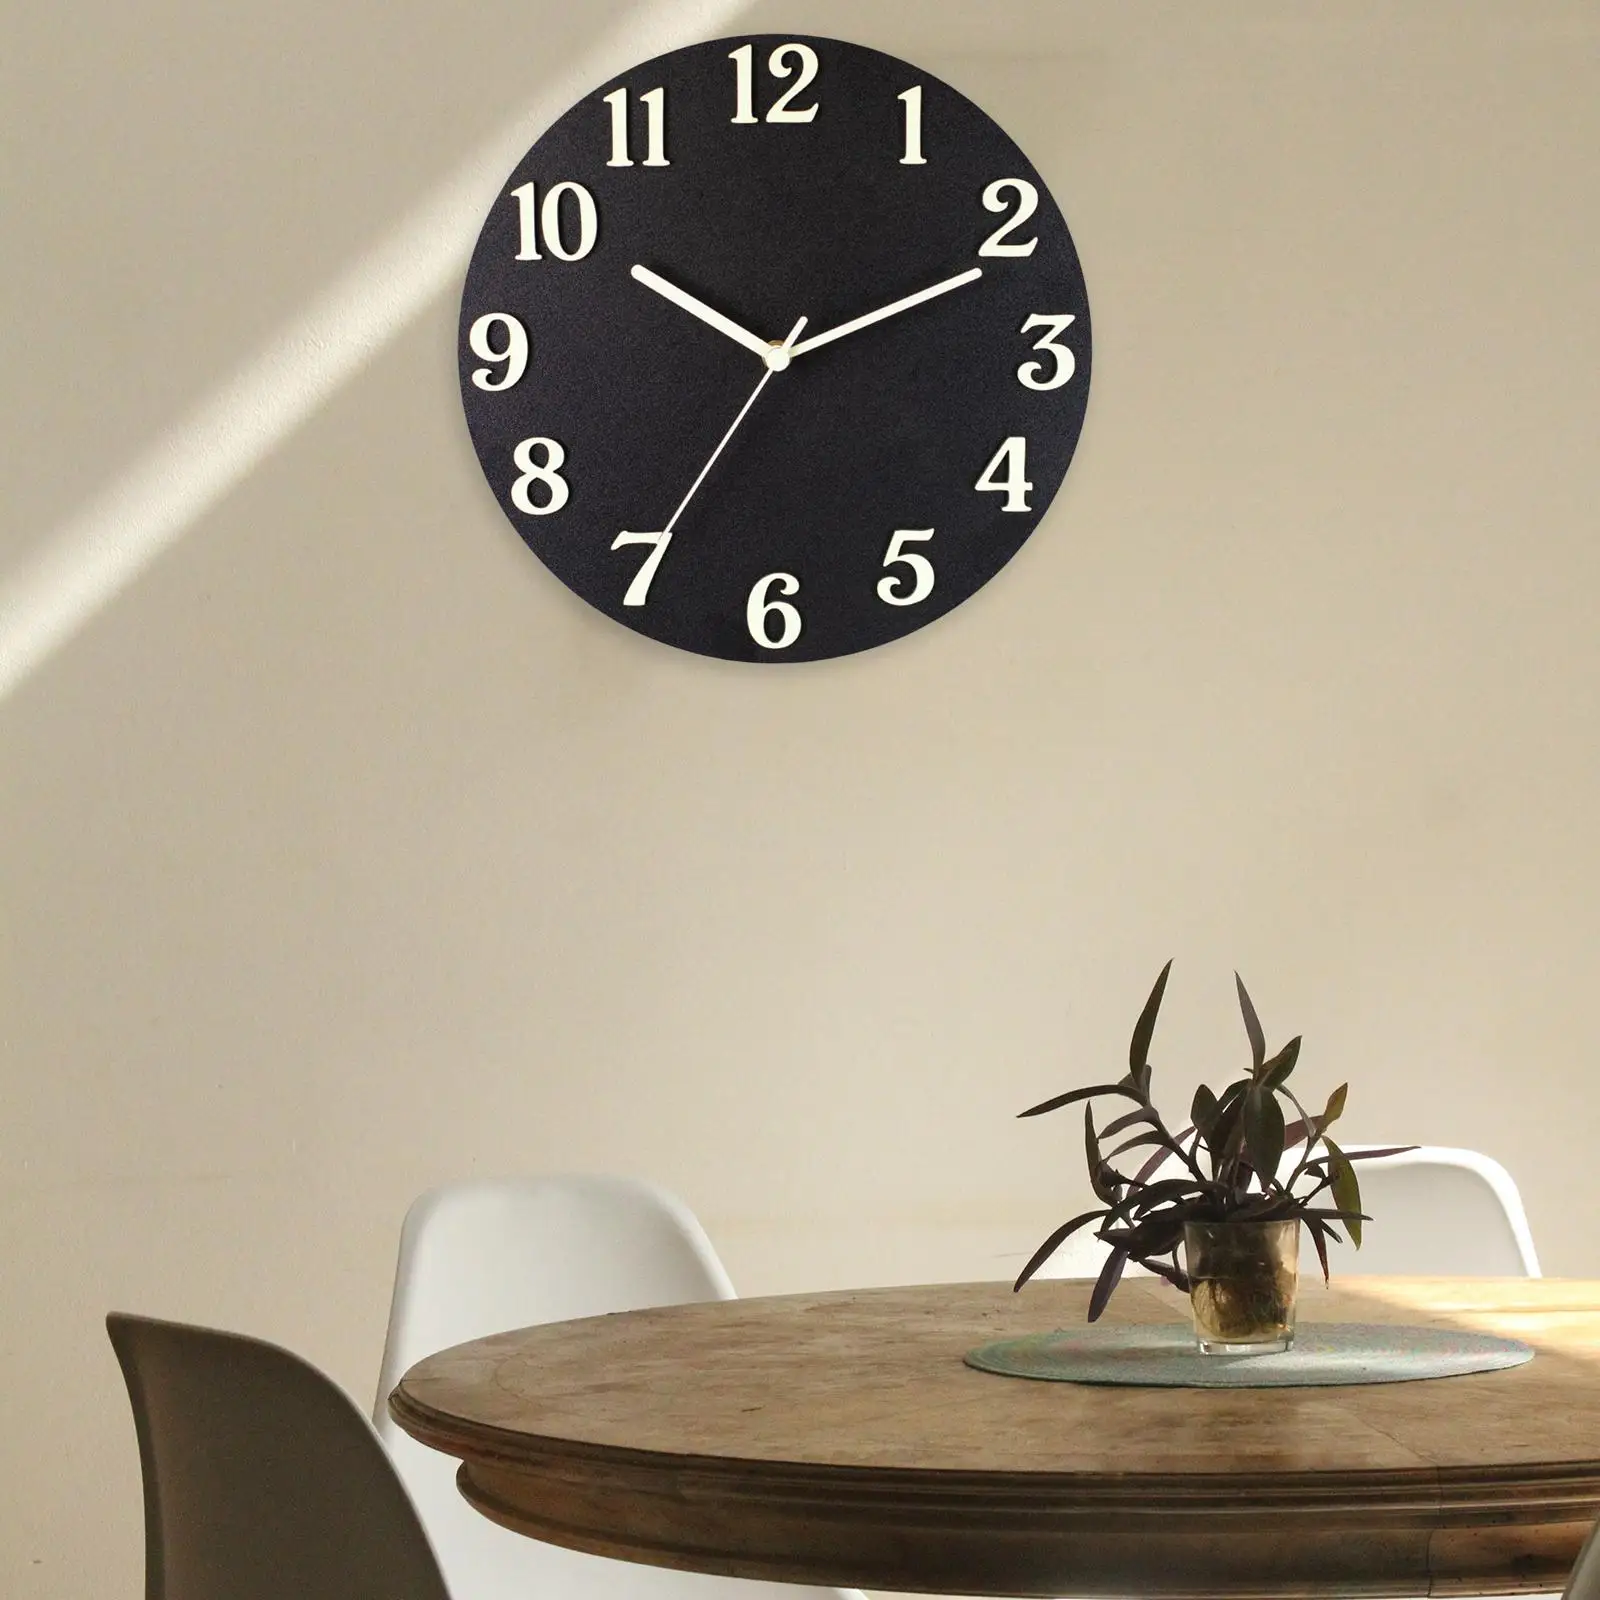 Simple Luminous Wall Clock Wooden Hanging Clock Light in The Dark Non Ticking Silent Battery Operated for Home Bedroom Kitchen